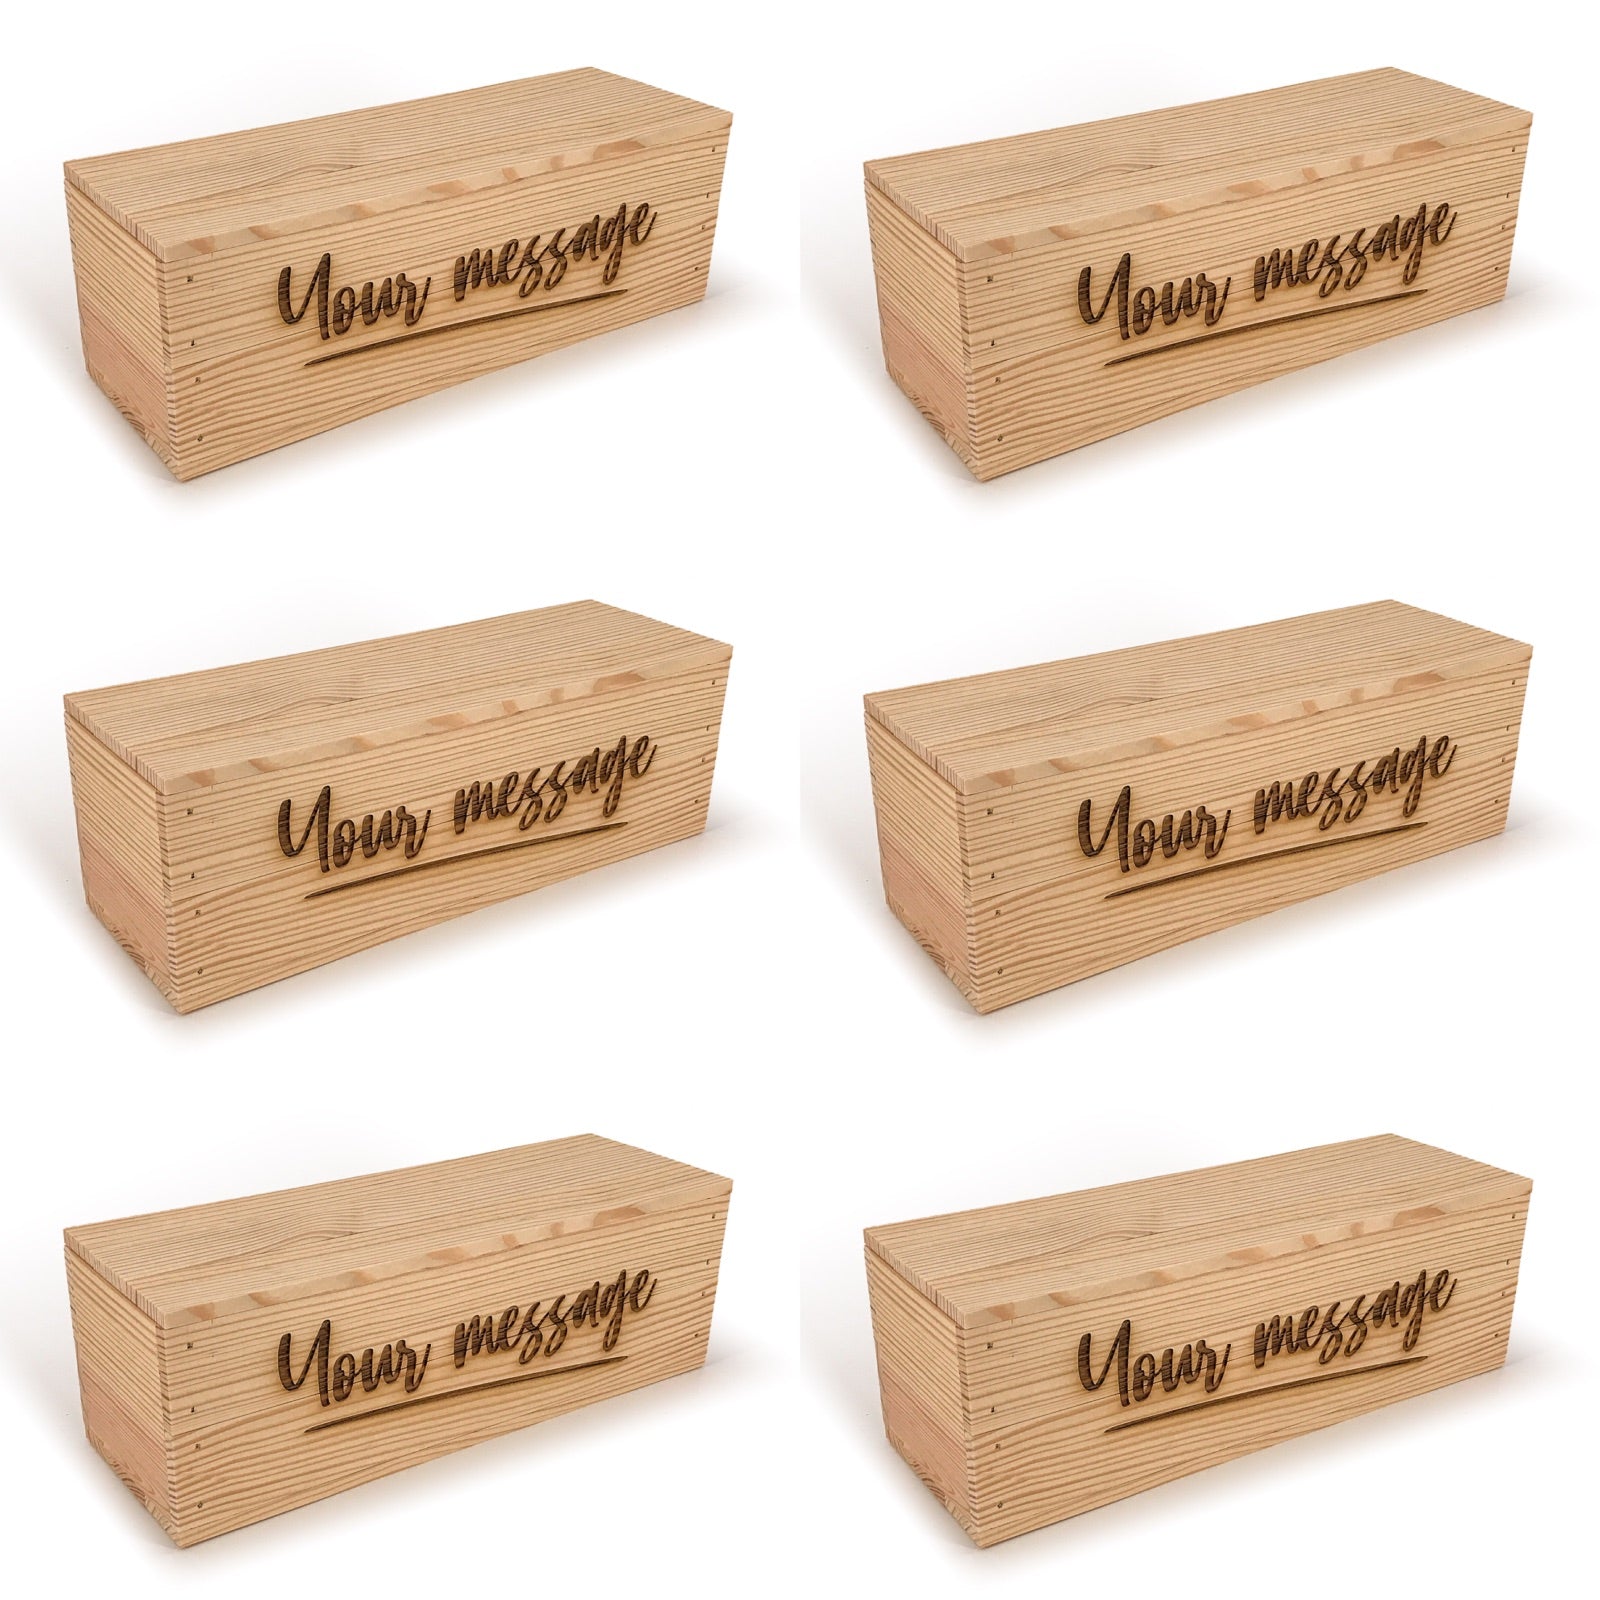 6 Single Bottle Wine Crate Box with Lid and Custom Message 14x4.5x4.5, 6-WB-14-4.5-4.5-ST-NW-LL,  12-WB-14-4.5-4.5-ST-NW-LL,  24-WB-14-4.5-4.5-ST-NW-LL,  48-WB-14-4.5-4.5-ST-NW-LL,  96-WB-14-4.5-4.5-ST-NW-LL